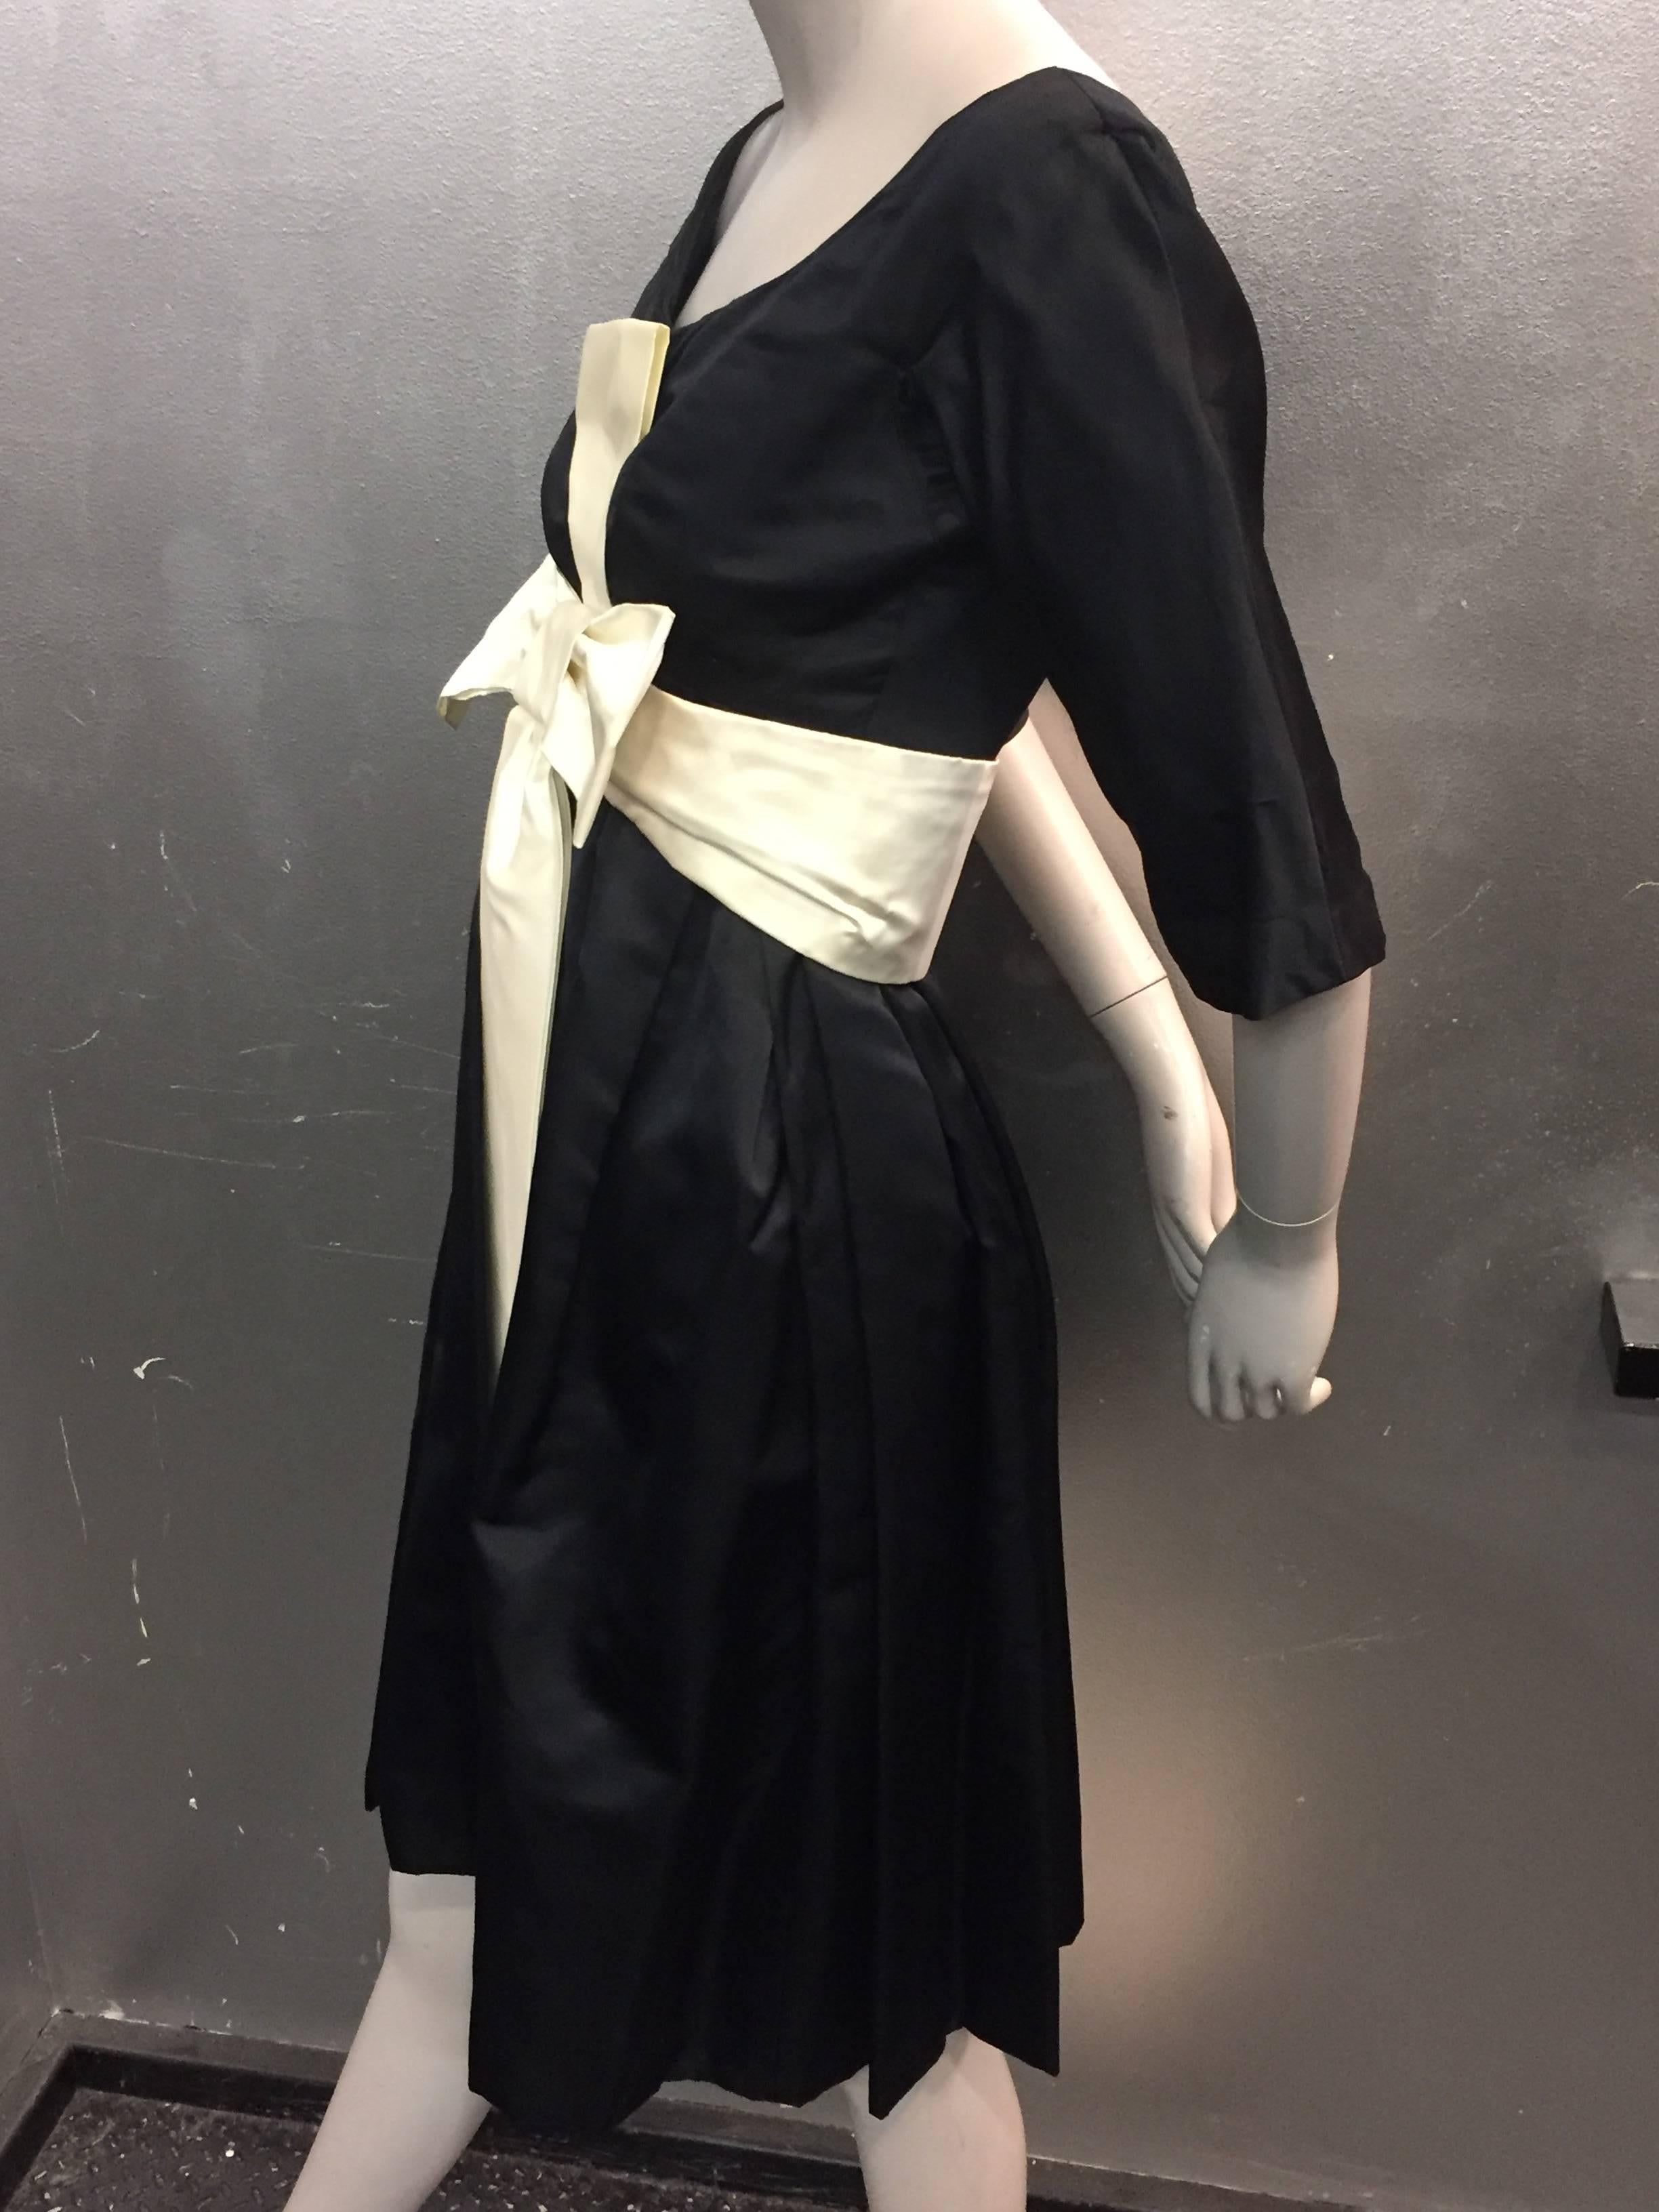 A stunning 1950s Neiman Marcus couture quality black silk cocktail dress:  Scoop neck, 3/4 sleeves, fitted Empire waist line, and pleated full skirt. Leather backed sash/belt construction.